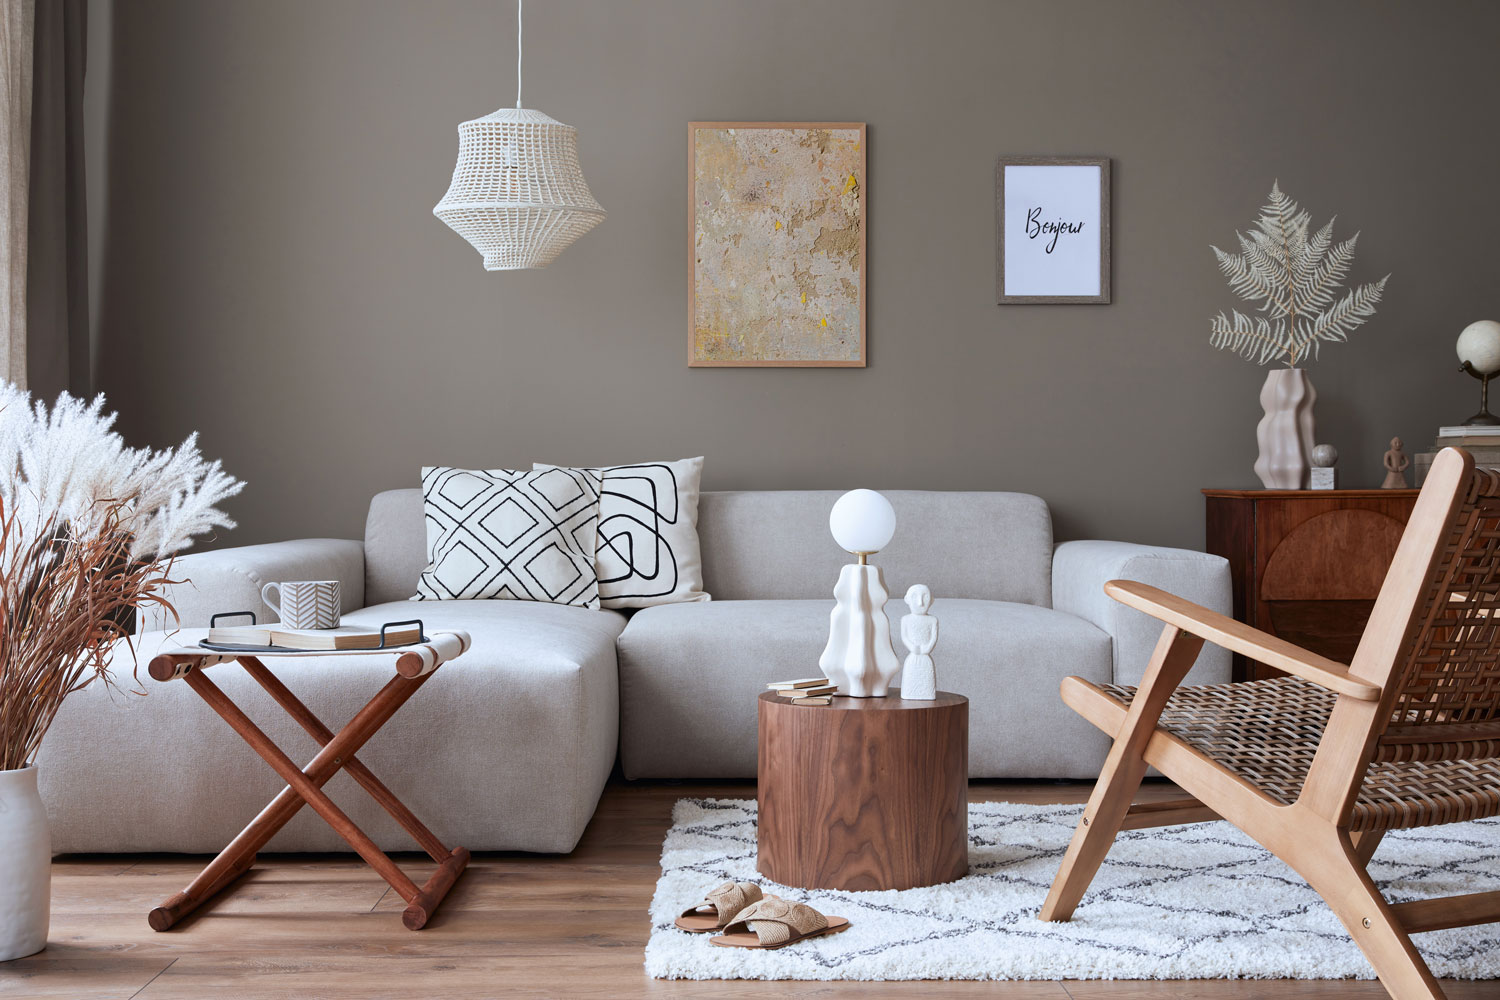 Interior of a stylish home decor with white modular sofas, rattan chairs and gray painted walls